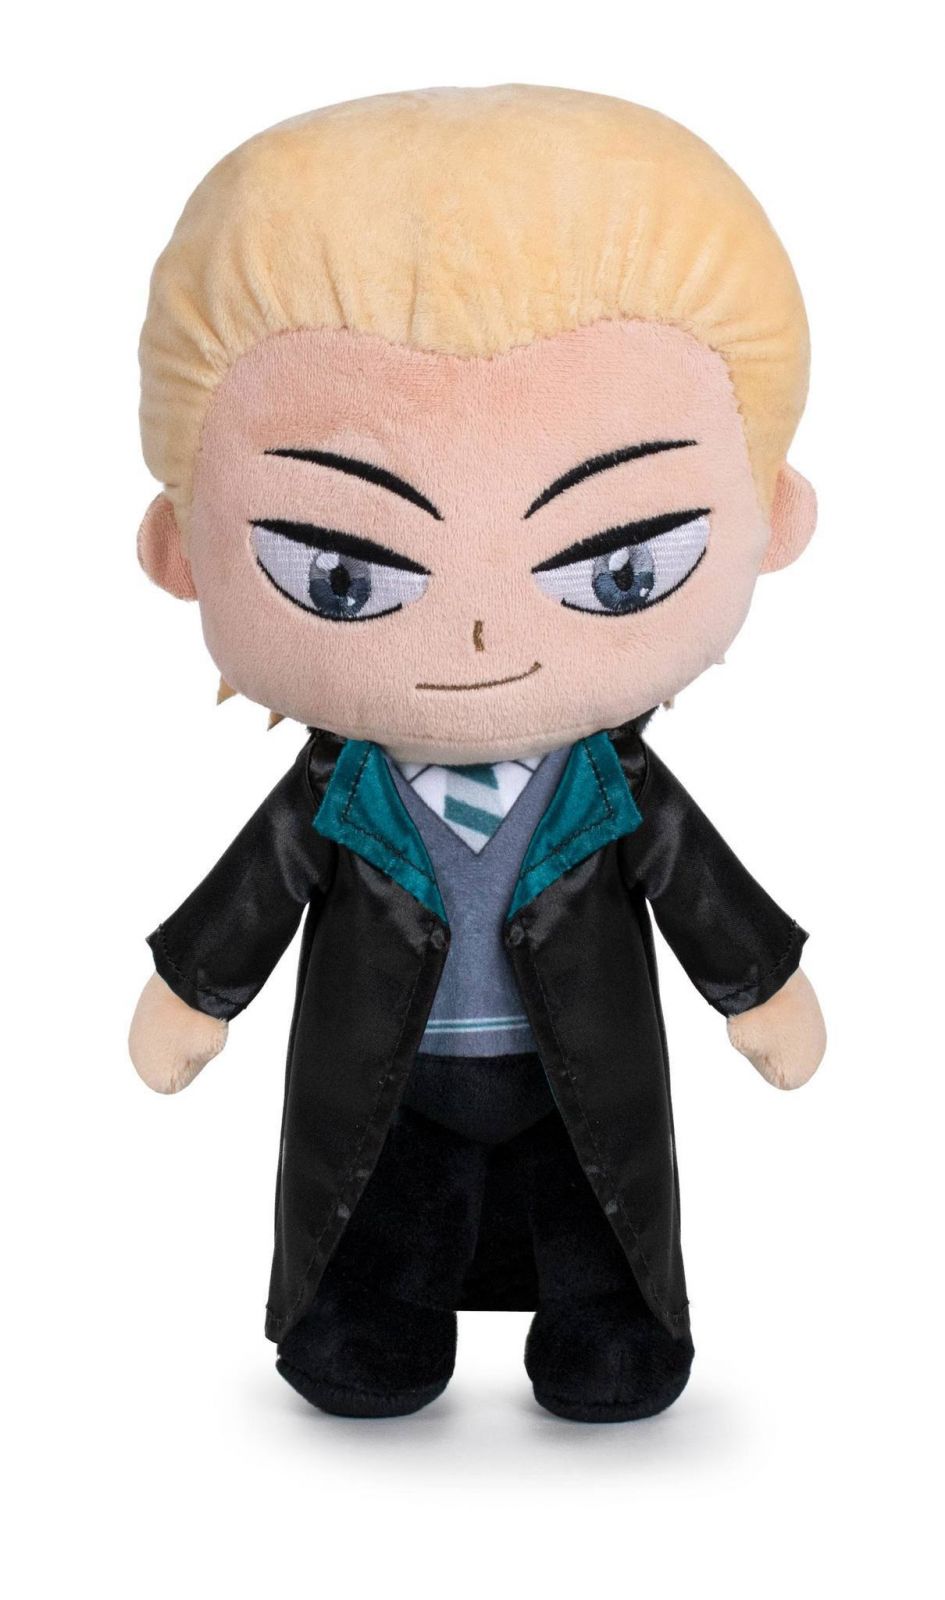 Harry Potter Plush Figures Assortment Draco Malfoy 20 cm (24) Play by Play